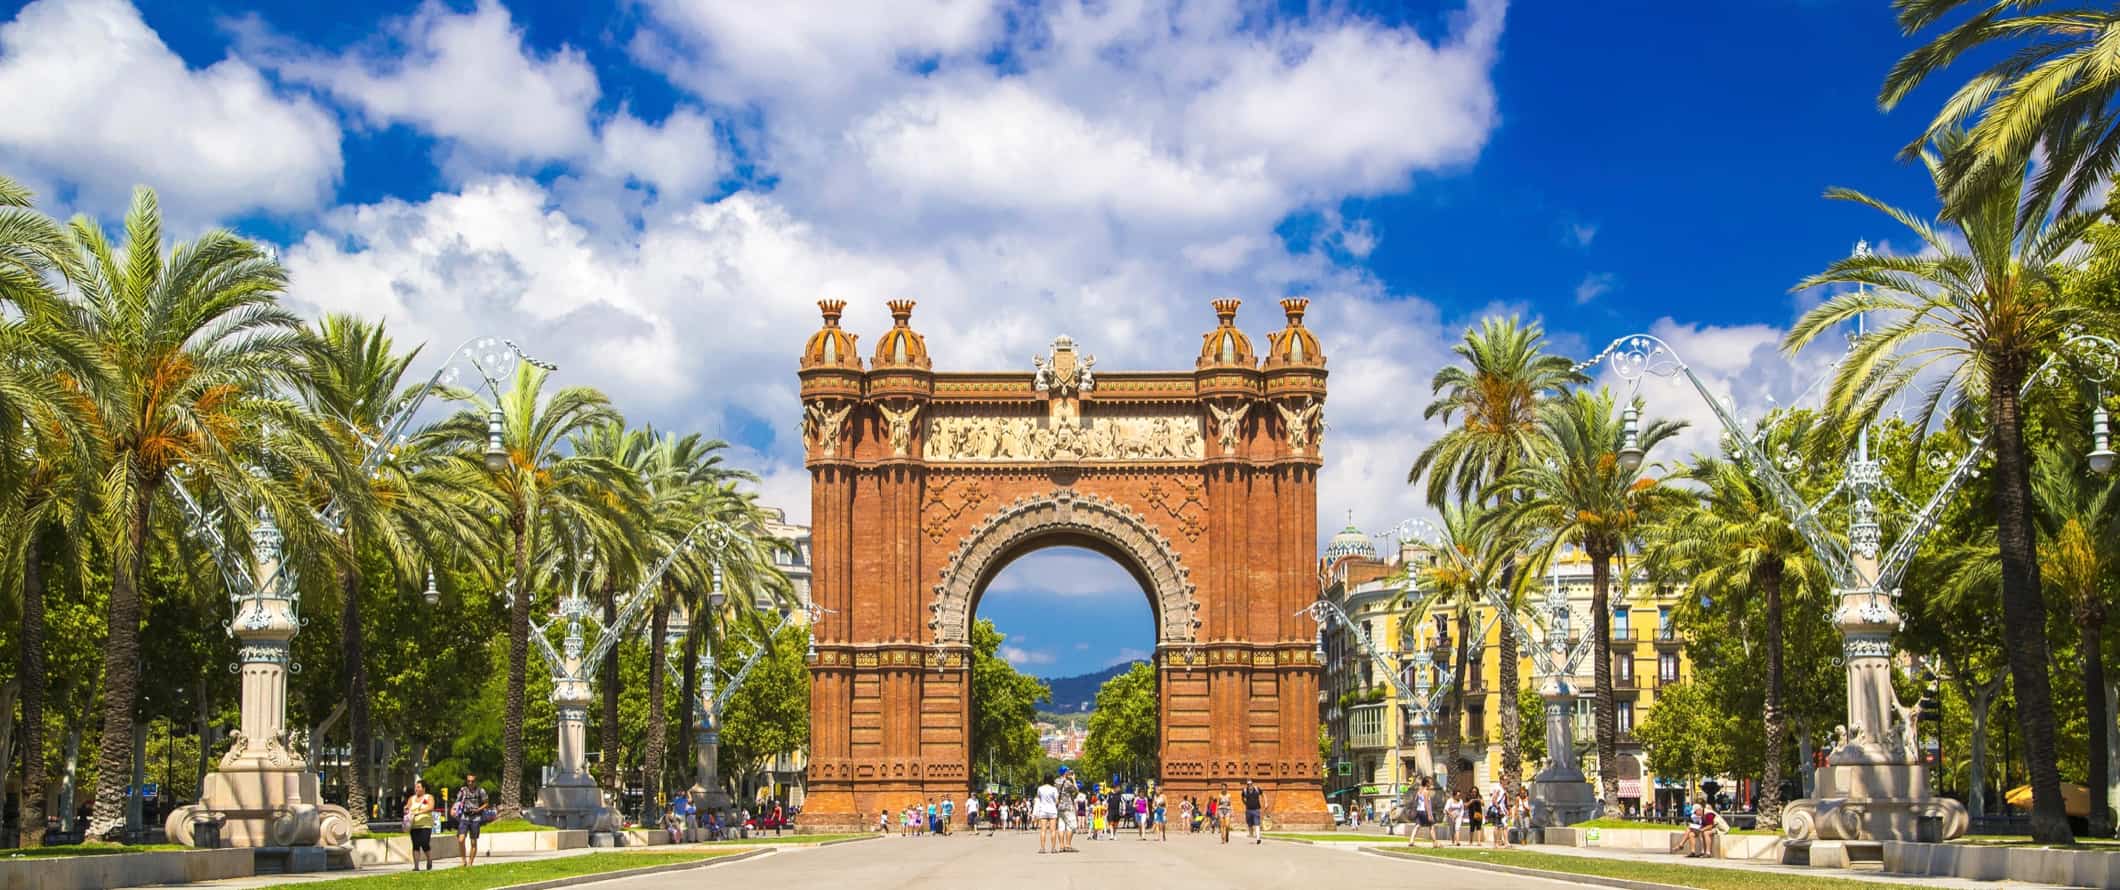 A wide open street in Barcelona, Spain with a huge arch